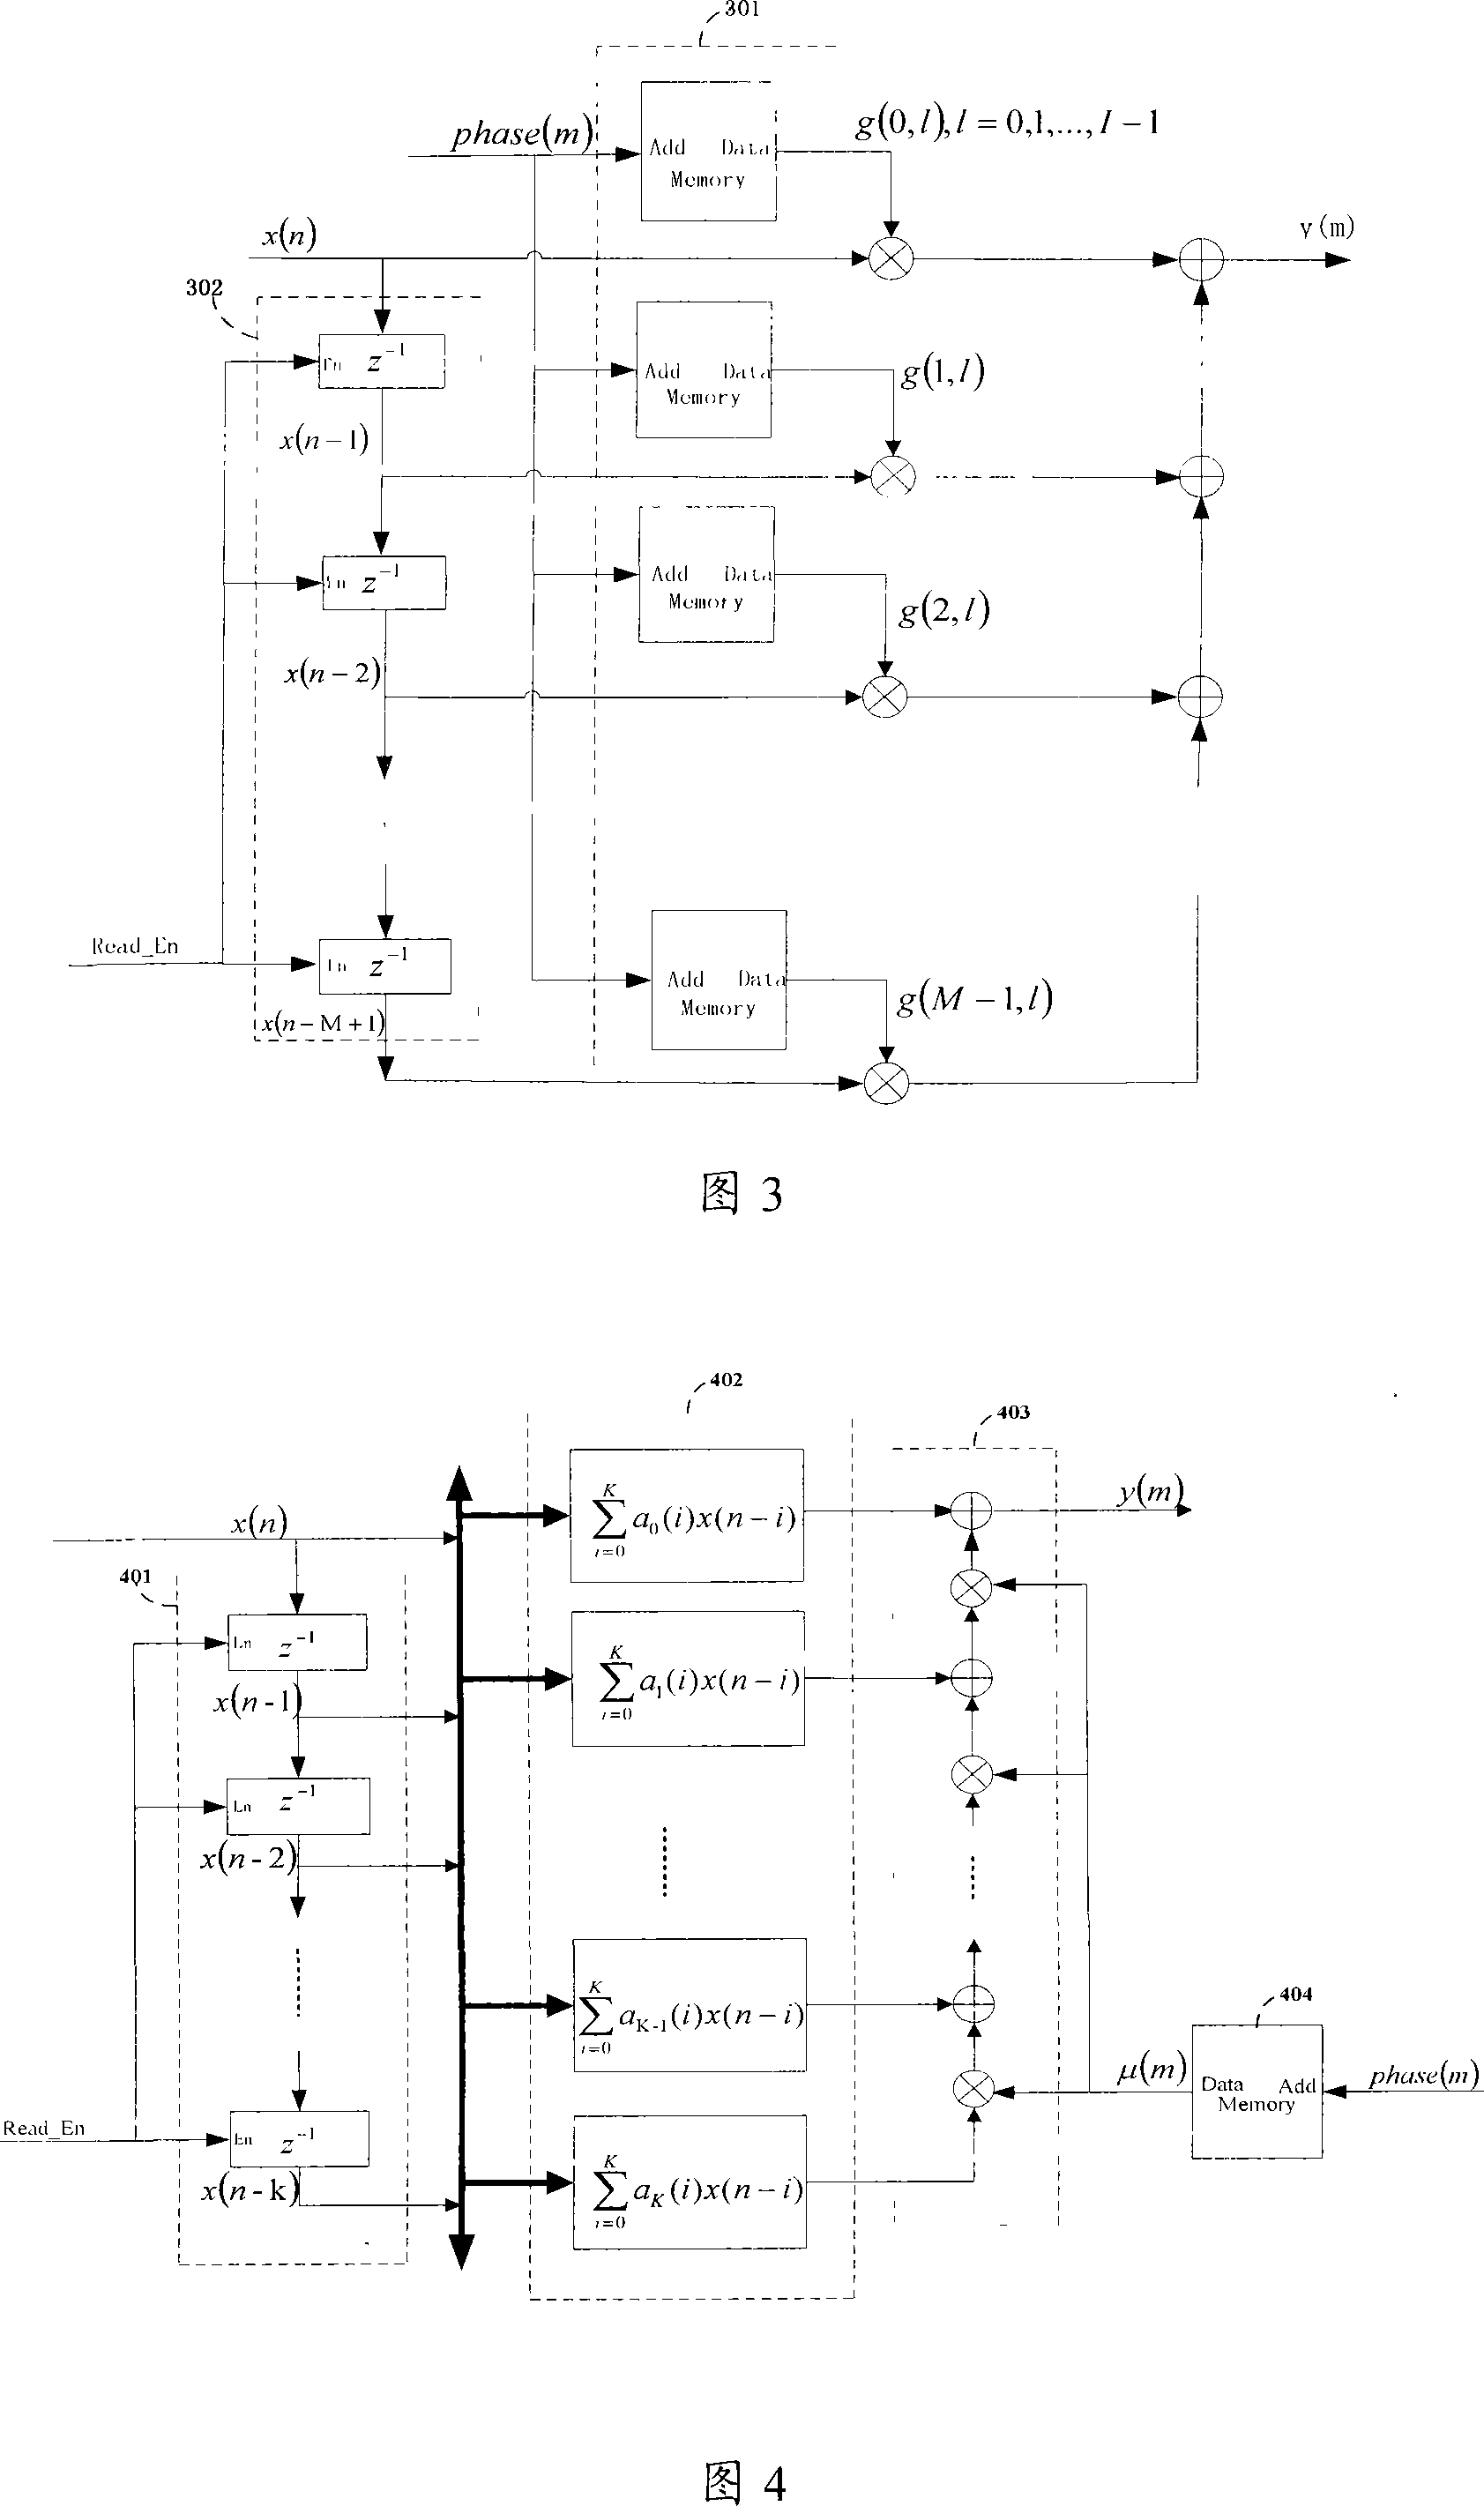 Apparatus and method for implementation of fixed decimal sampling frequency conversion